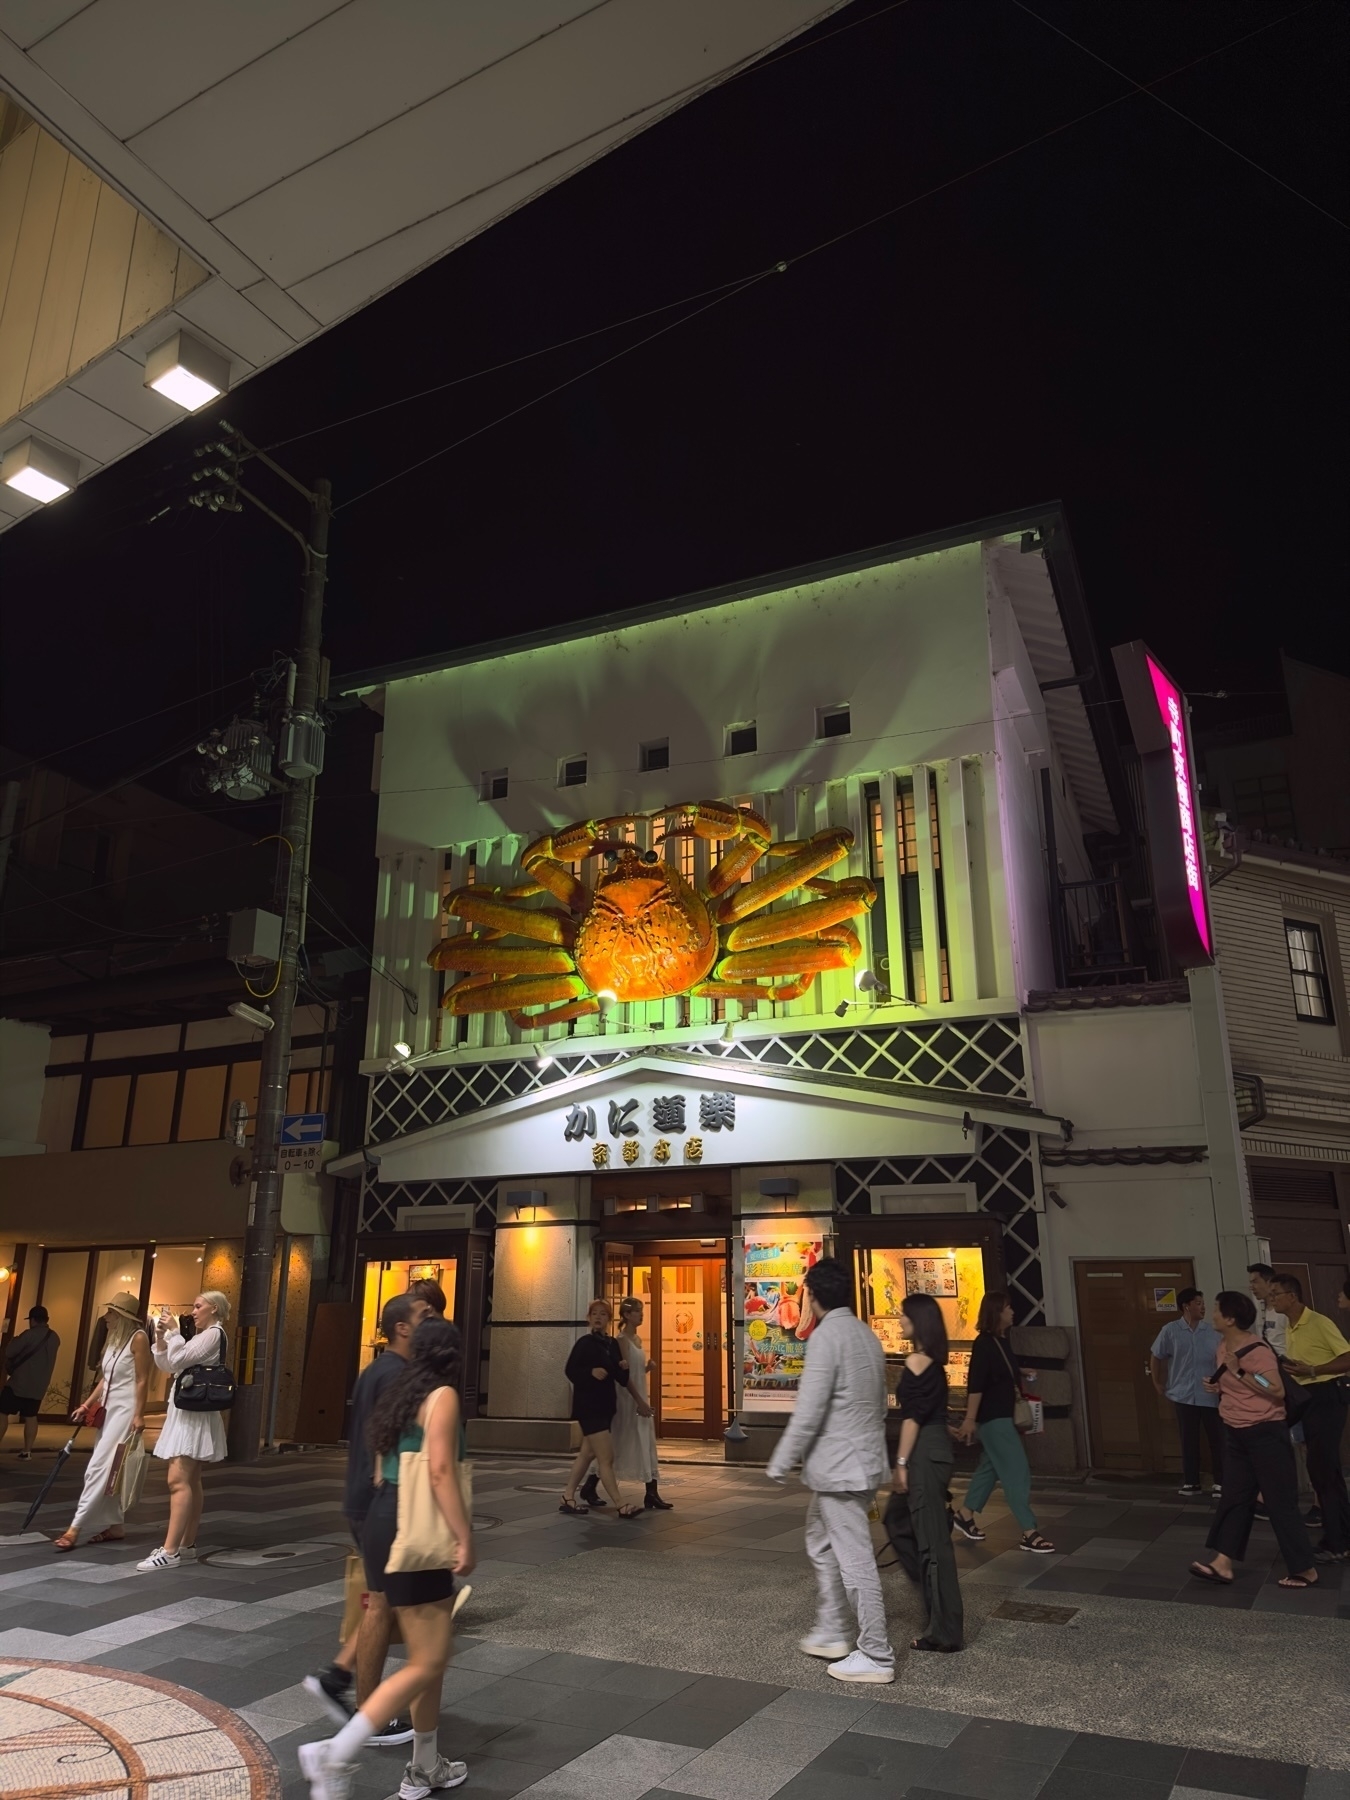 Nighttime street view of a building with a large illuminated 3D crab sculpture above the entrance, people walking by on the sidewalk, streetlights, and signage with Japanese characters.